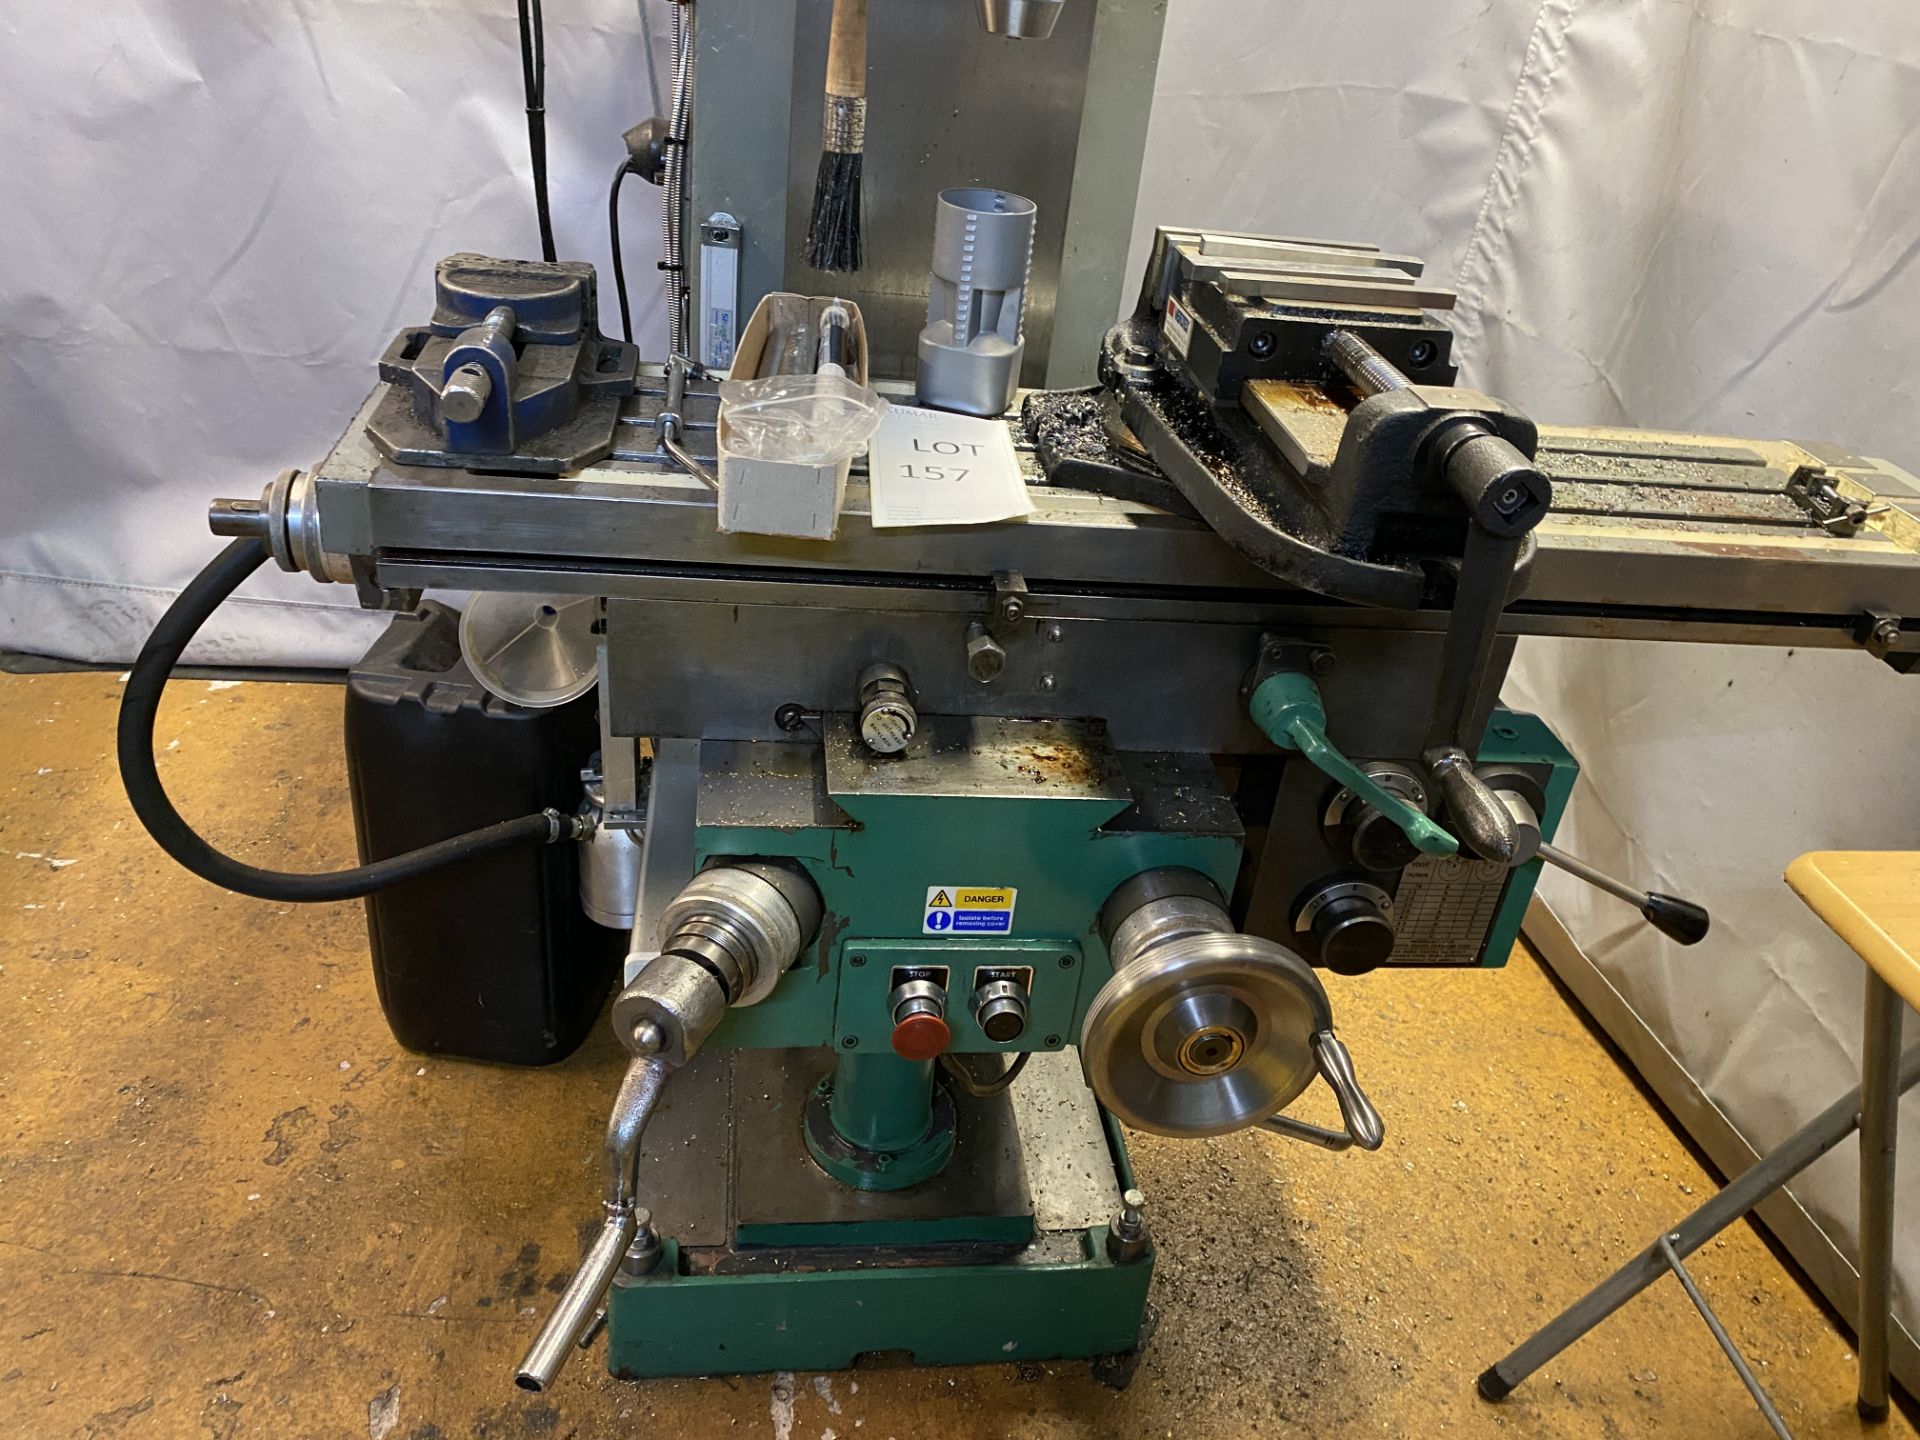 Elliott Milmor 10 Turret Milling Machine Serial No: 015807-119, complete with Sinpo - 3 Axis Dro - Image 4 of 17